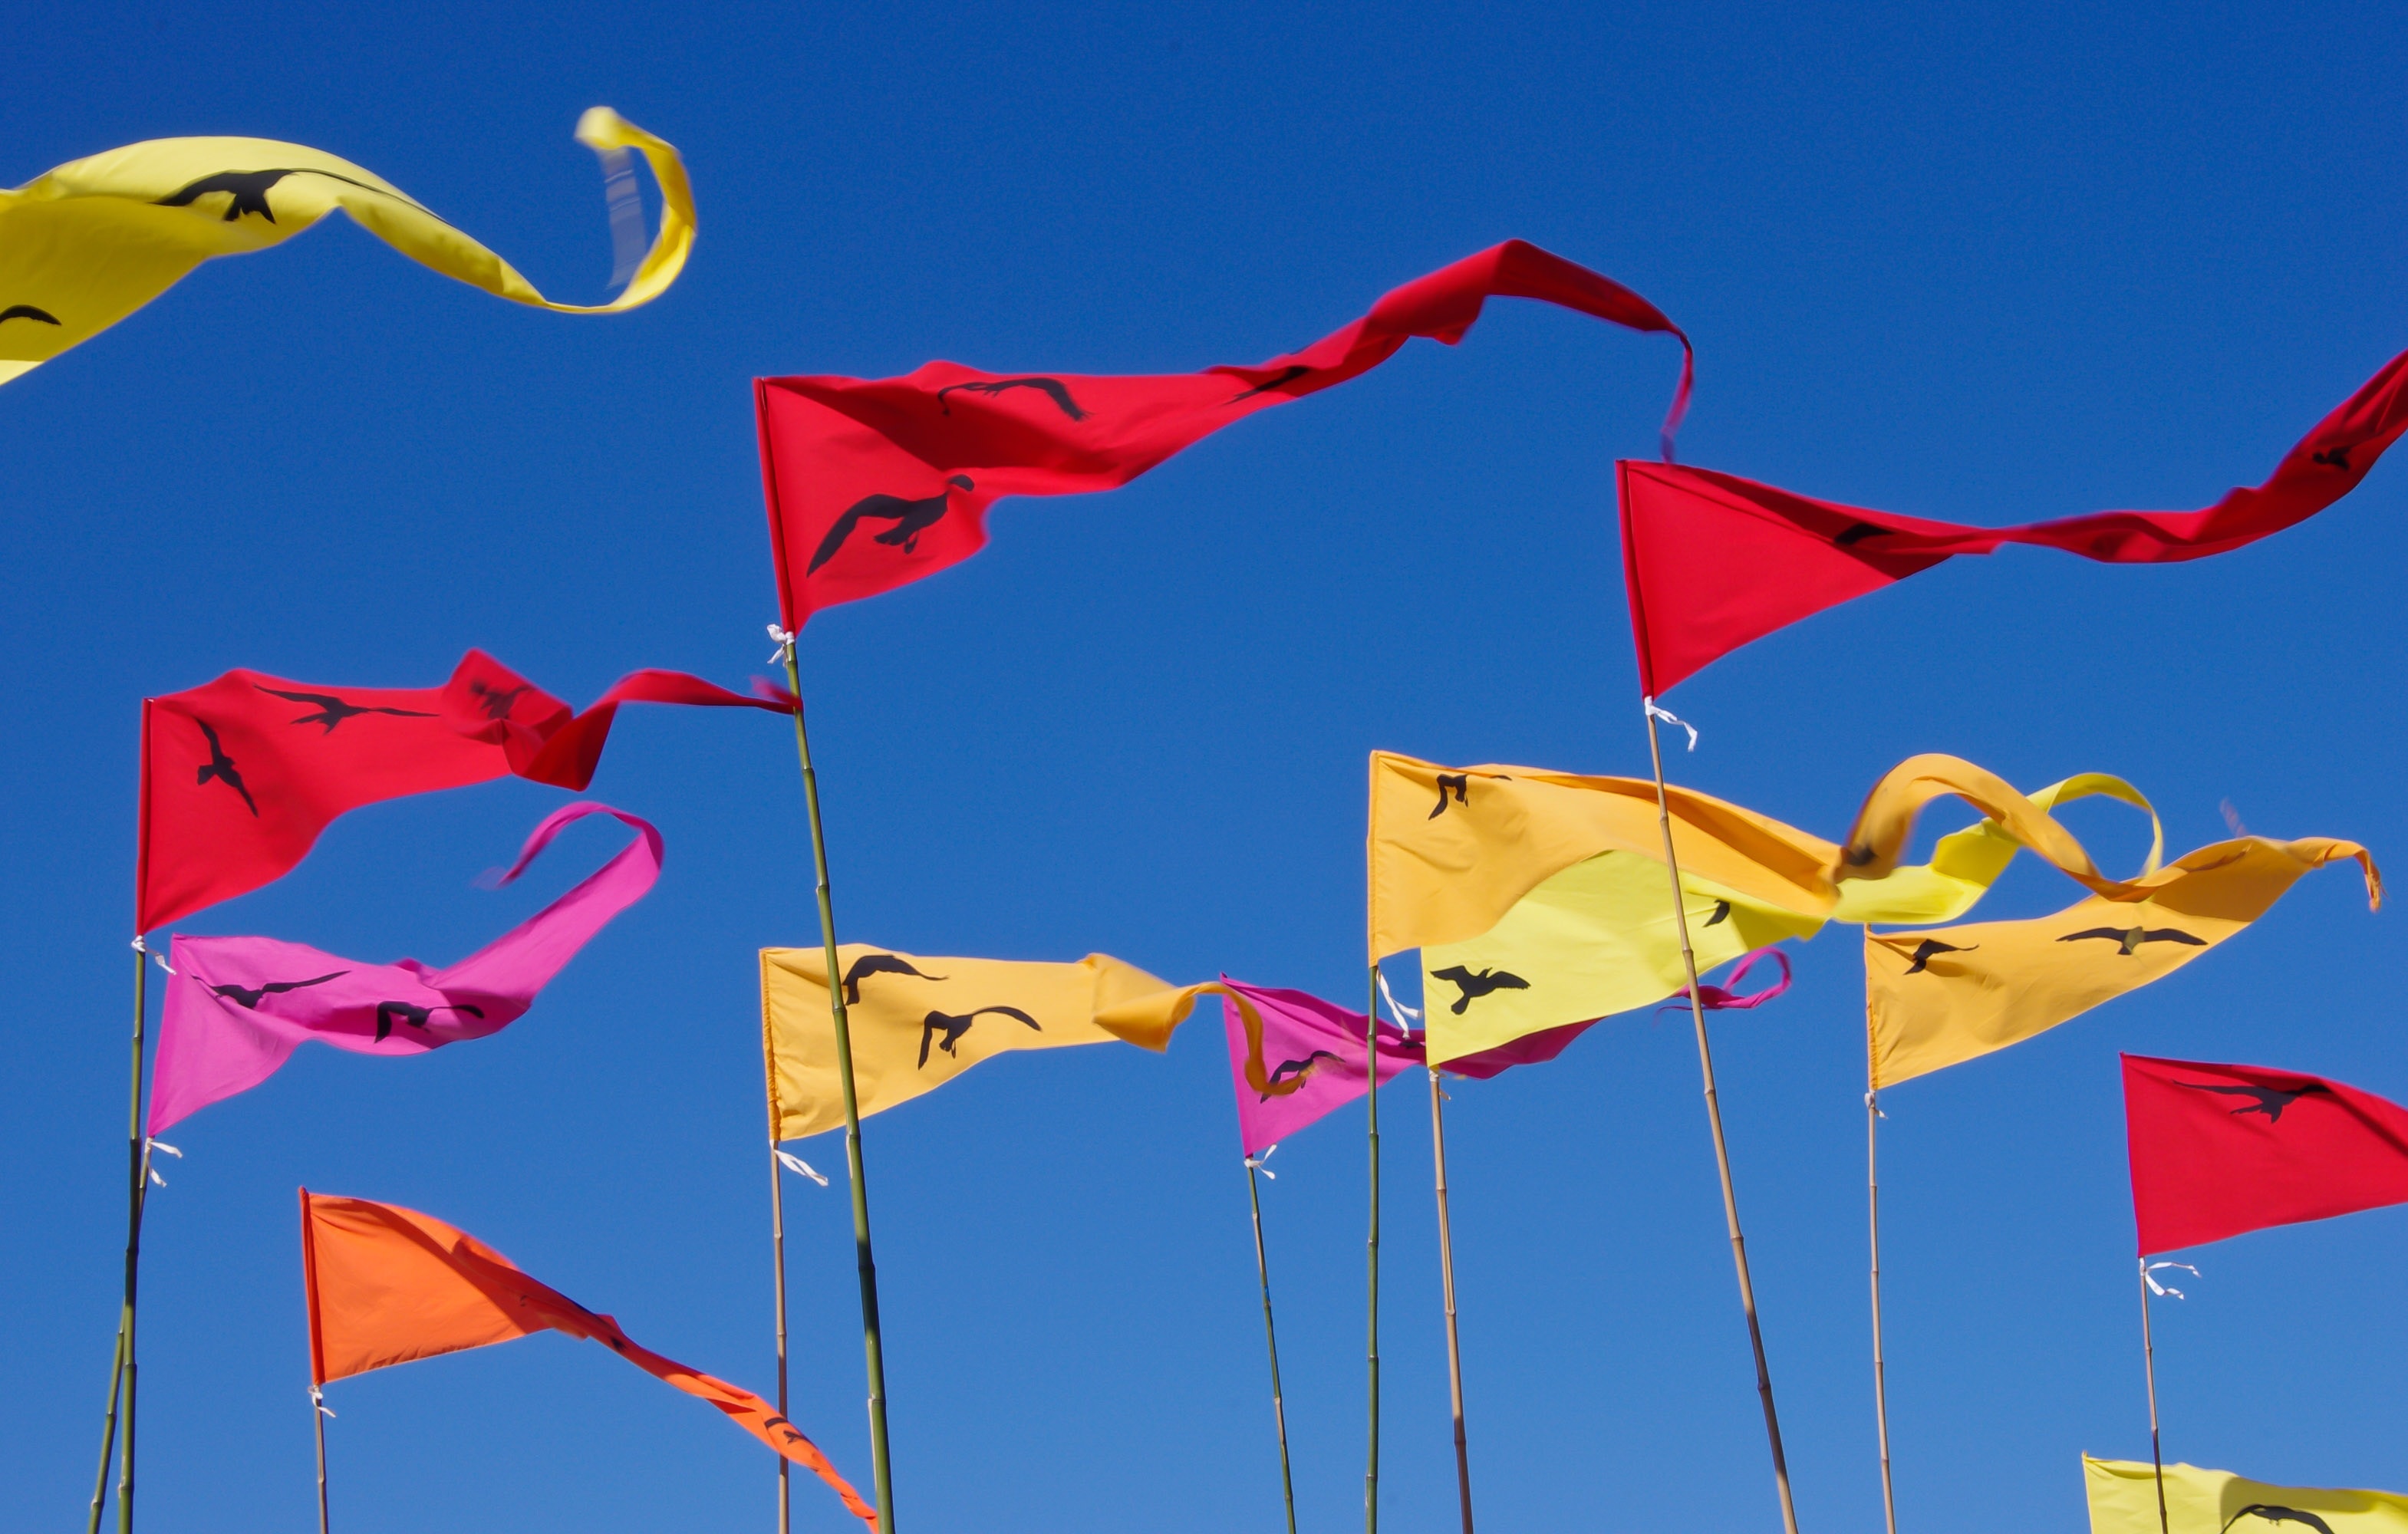 Sky, Flags, Pennants, Red, Yellow, Blue, flag, wind